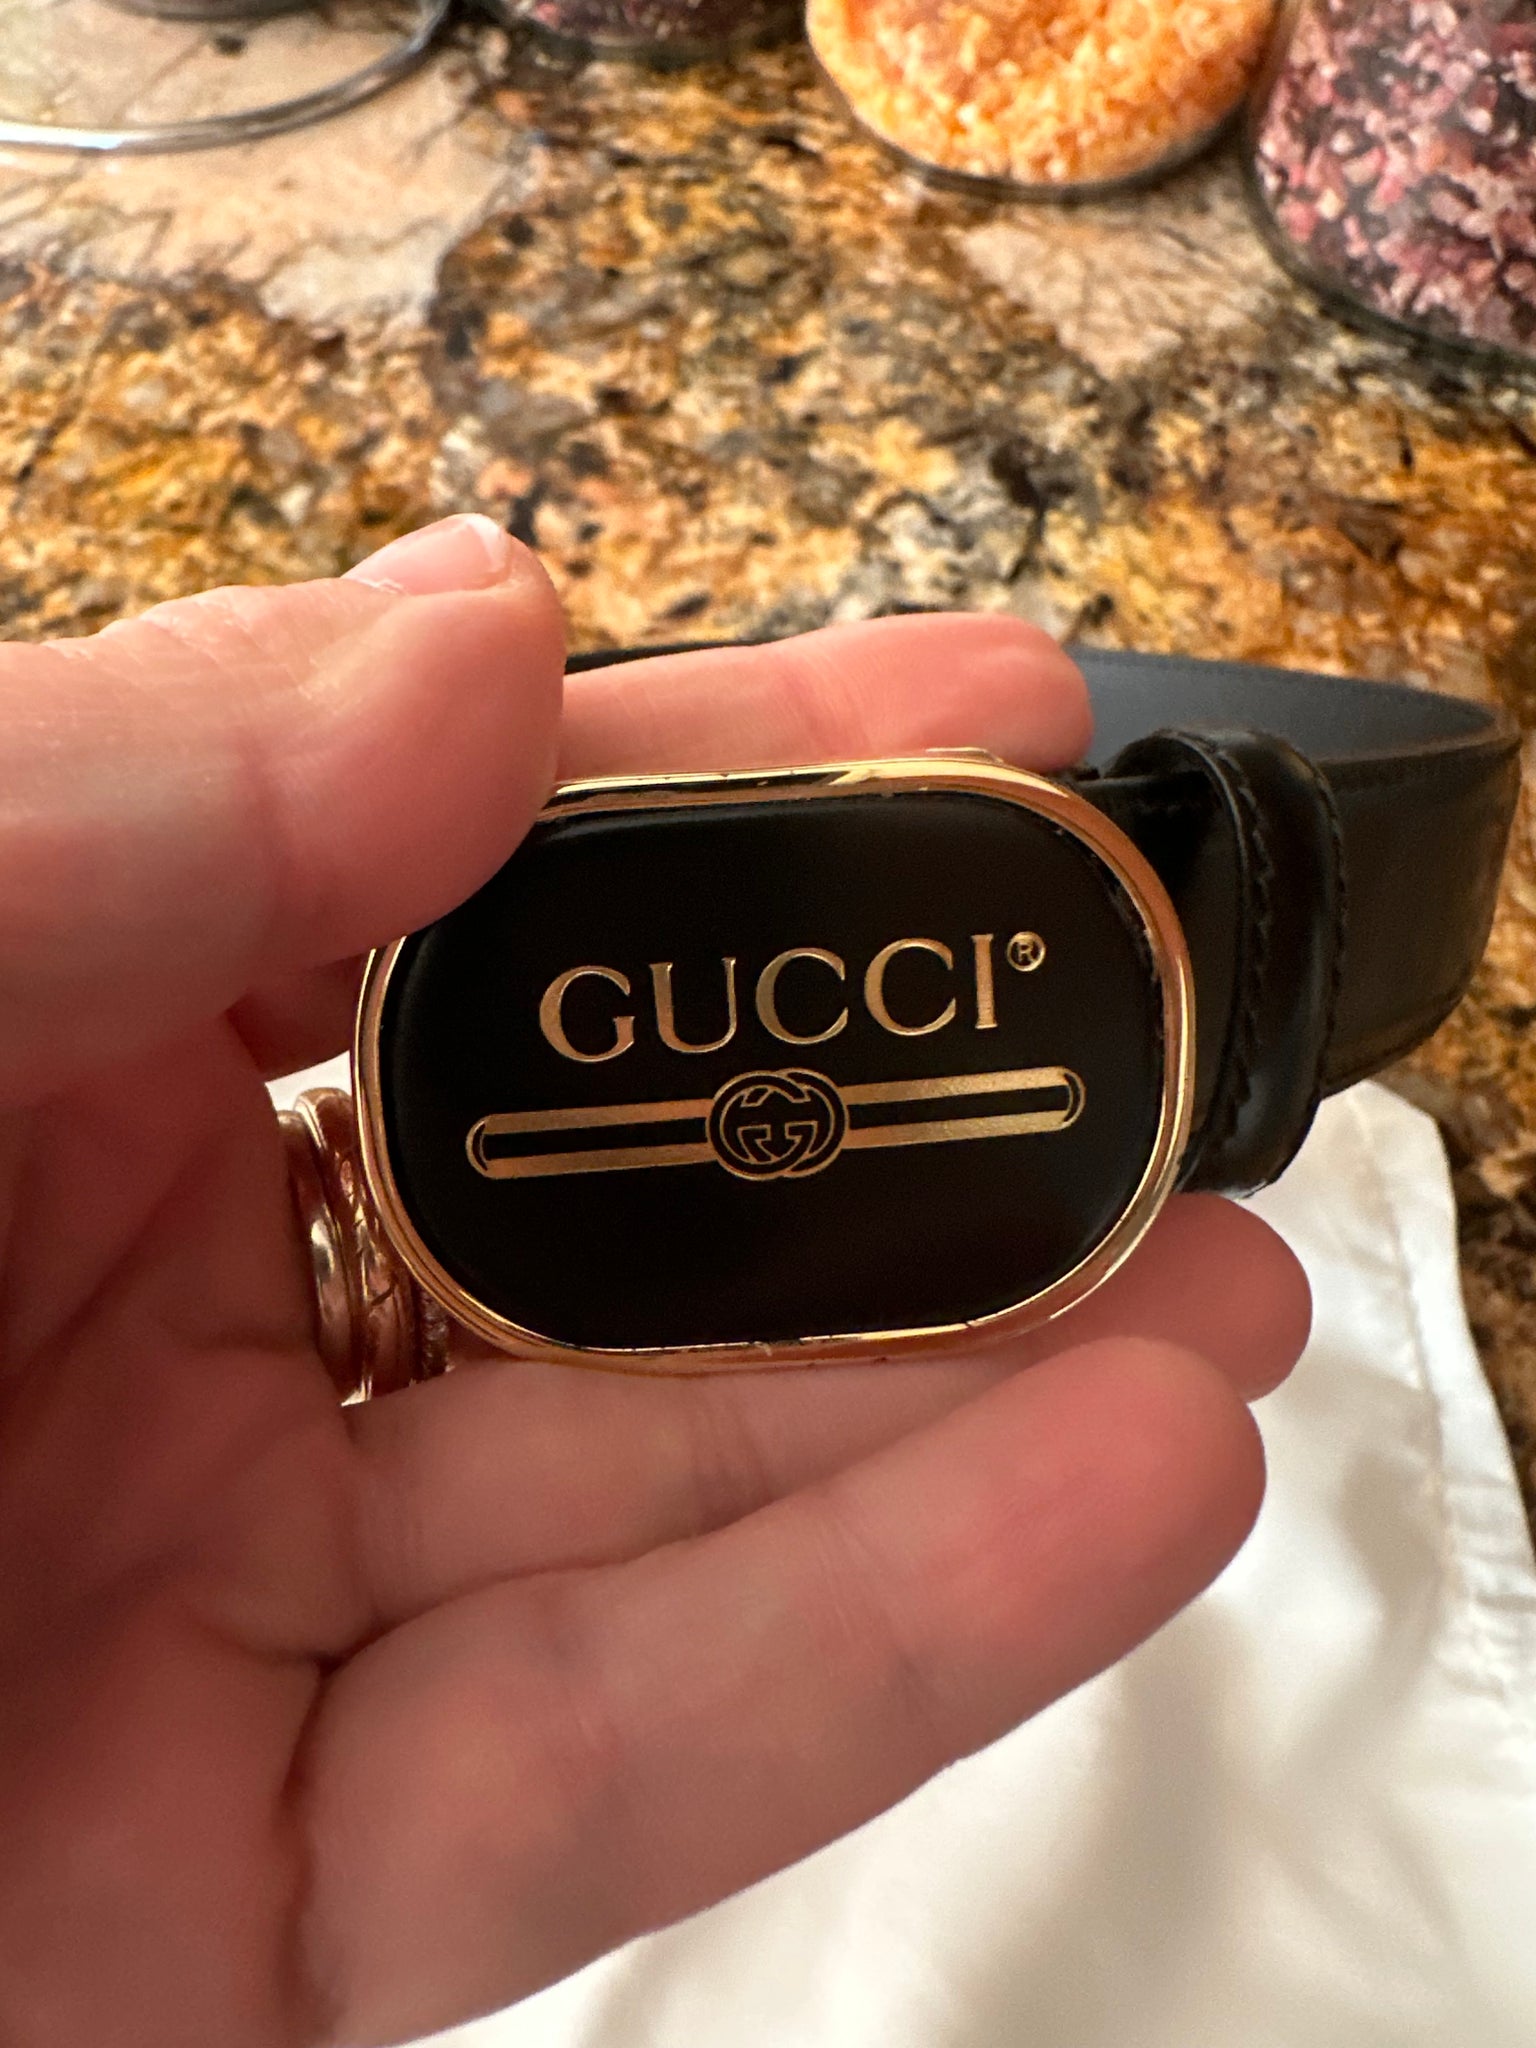 GG Marmont leather belt with shiny buckle